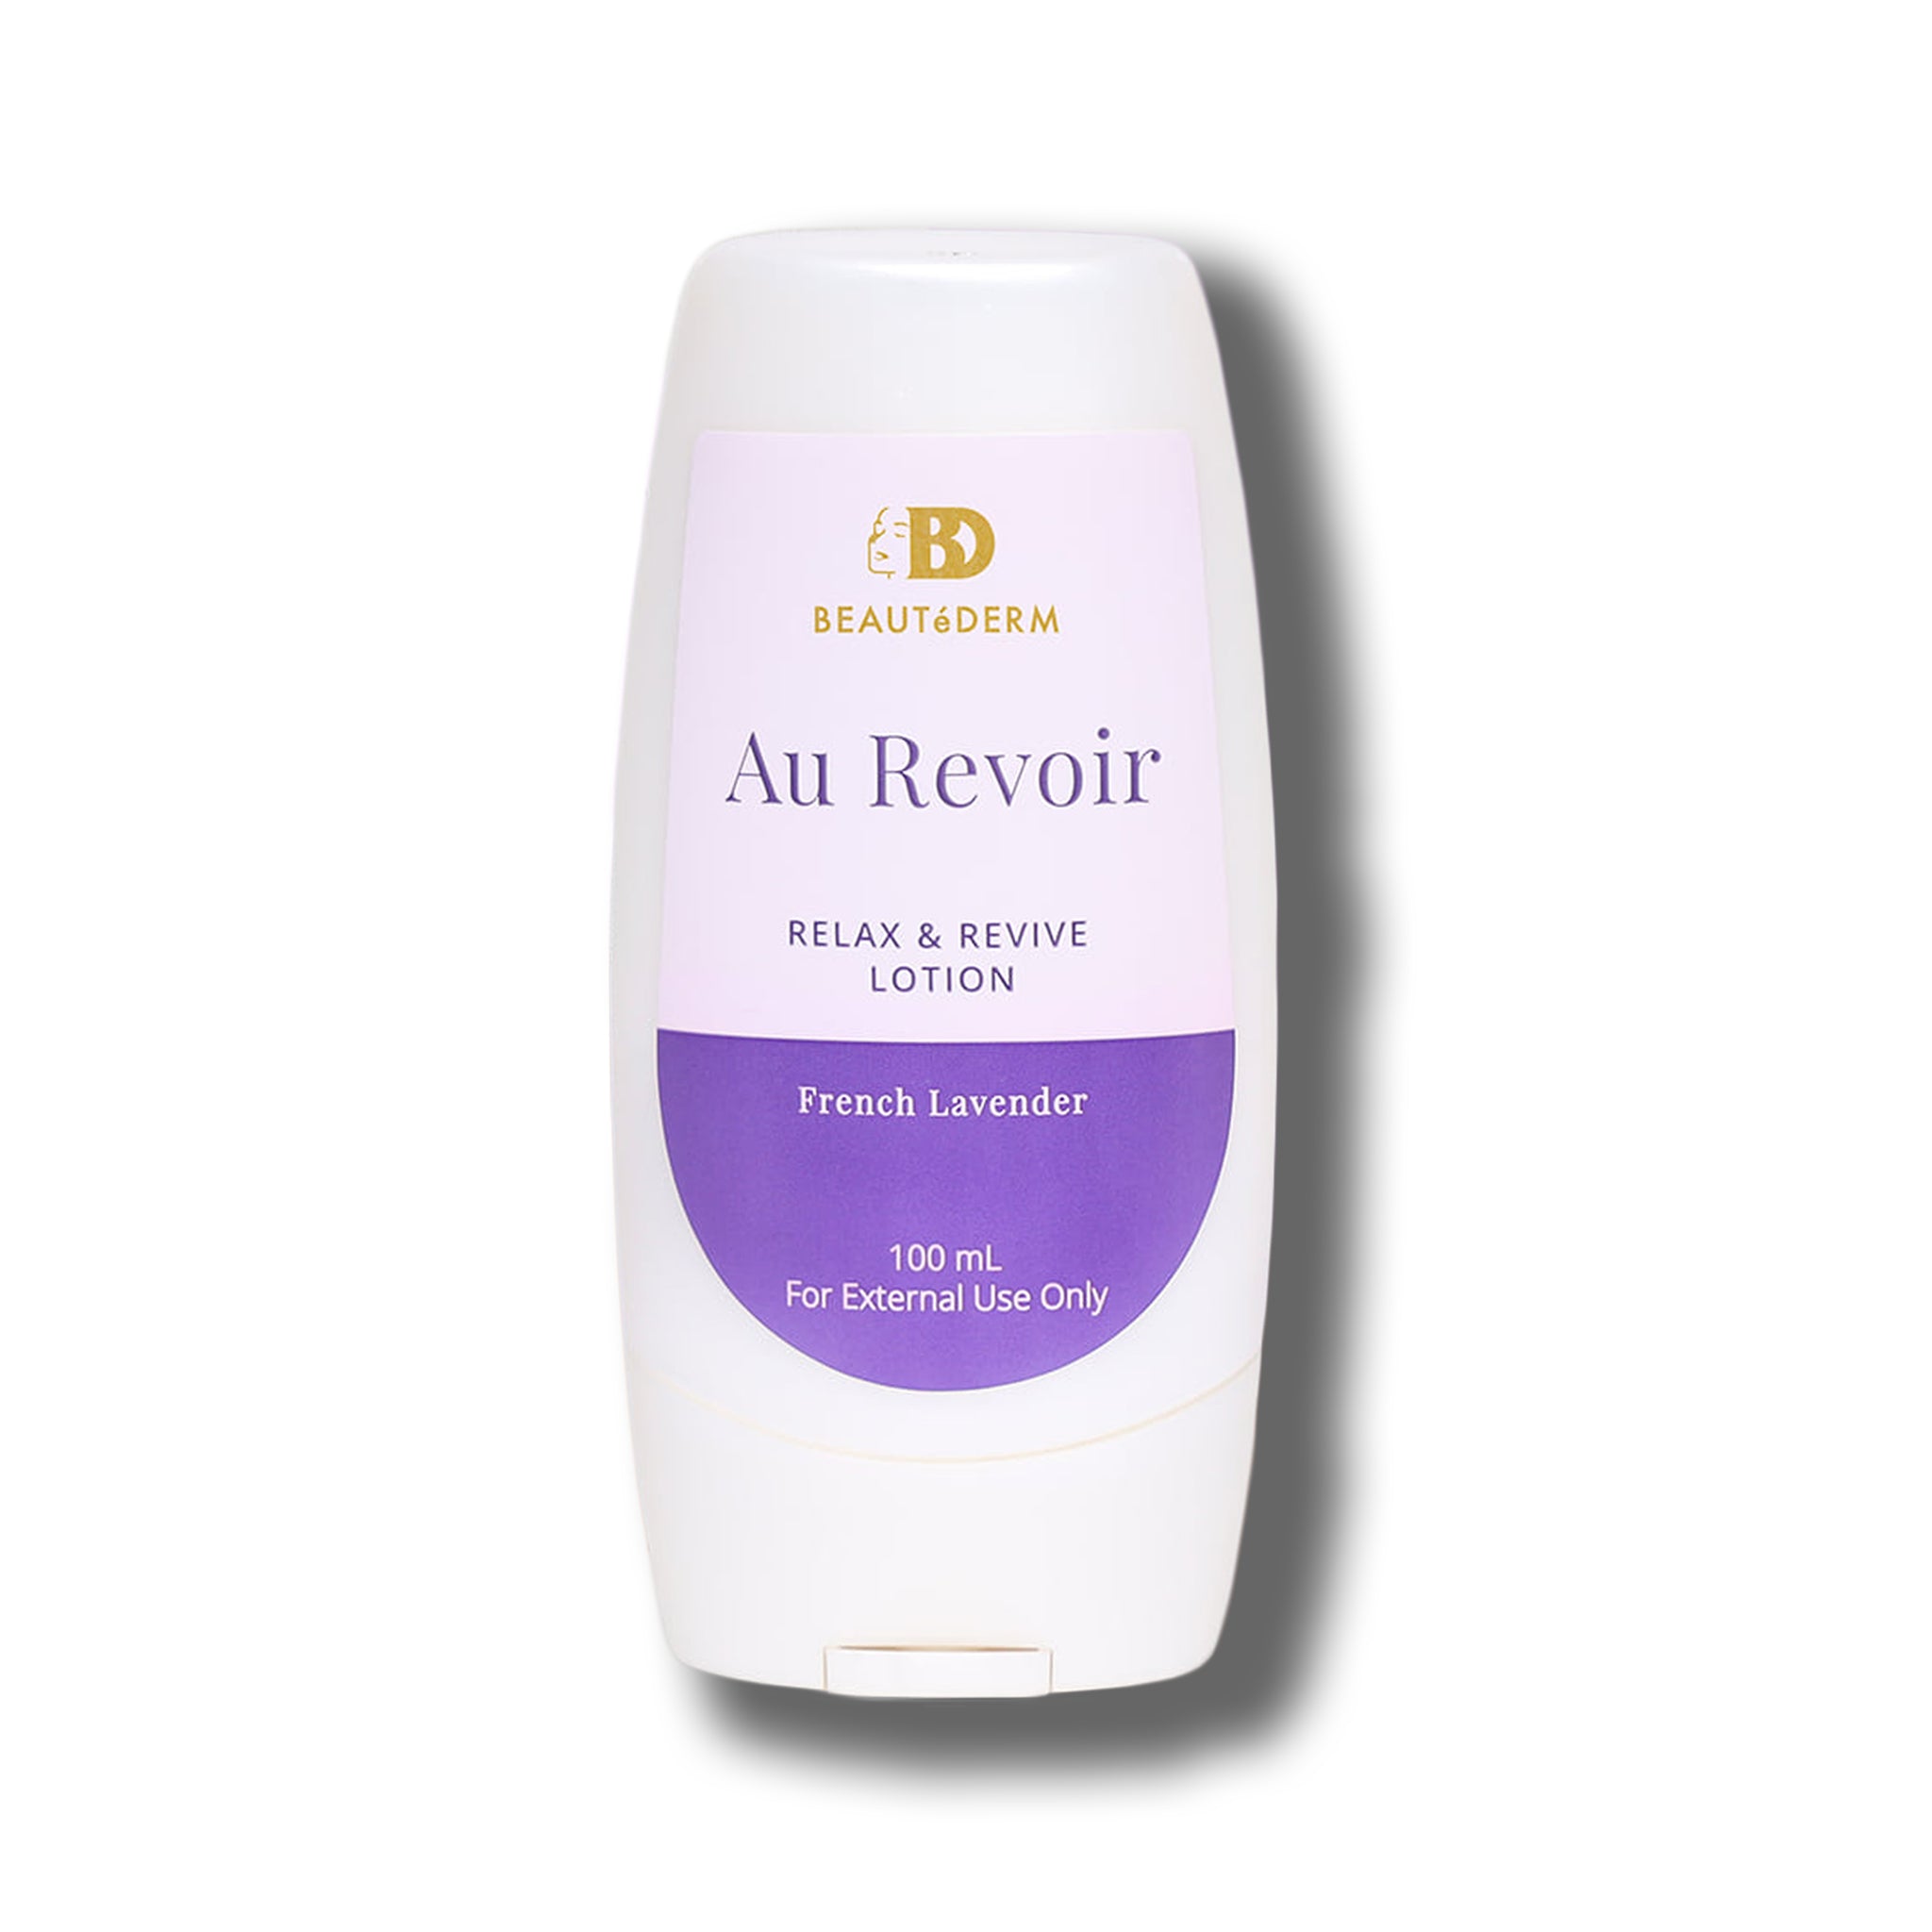 Au Revoir Relax & Revive Lotion, French Lavender, 100ml, by Beautederm